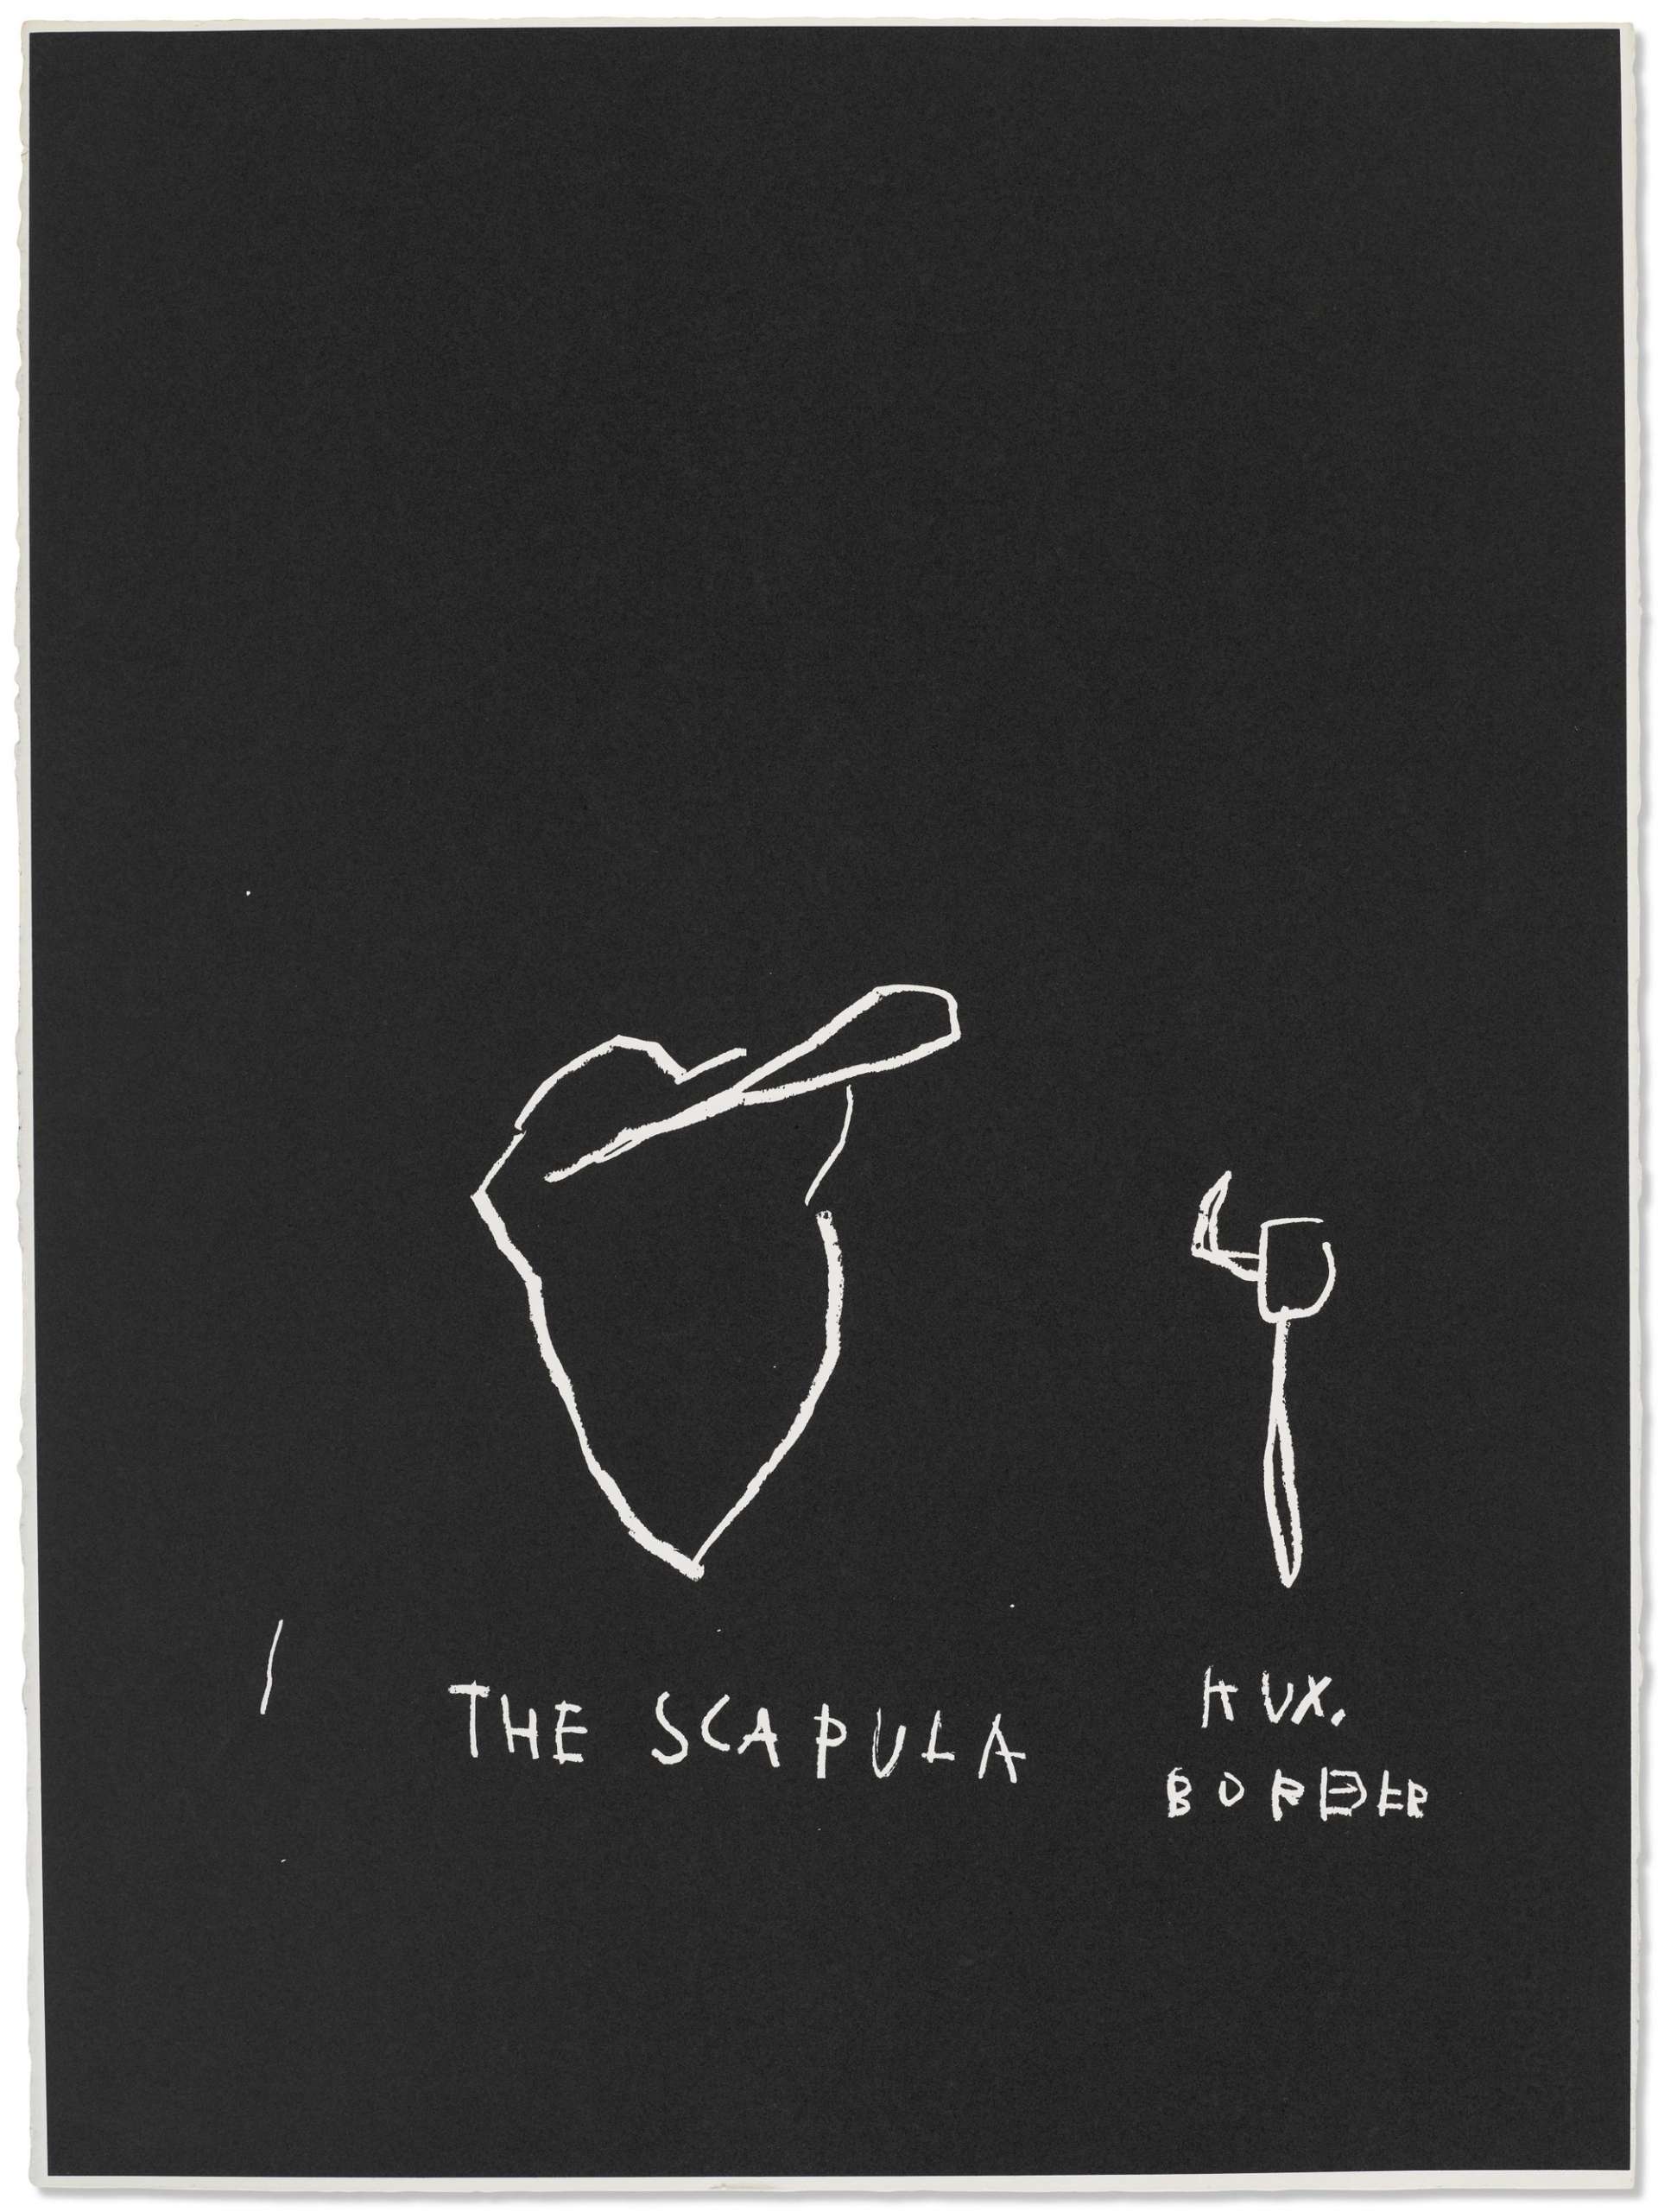 Jean-Michel Basquiat’s Anatomy, The Scapula. A black screenprint featuring white anatomical drawings of a human scapula with descriptive labels.